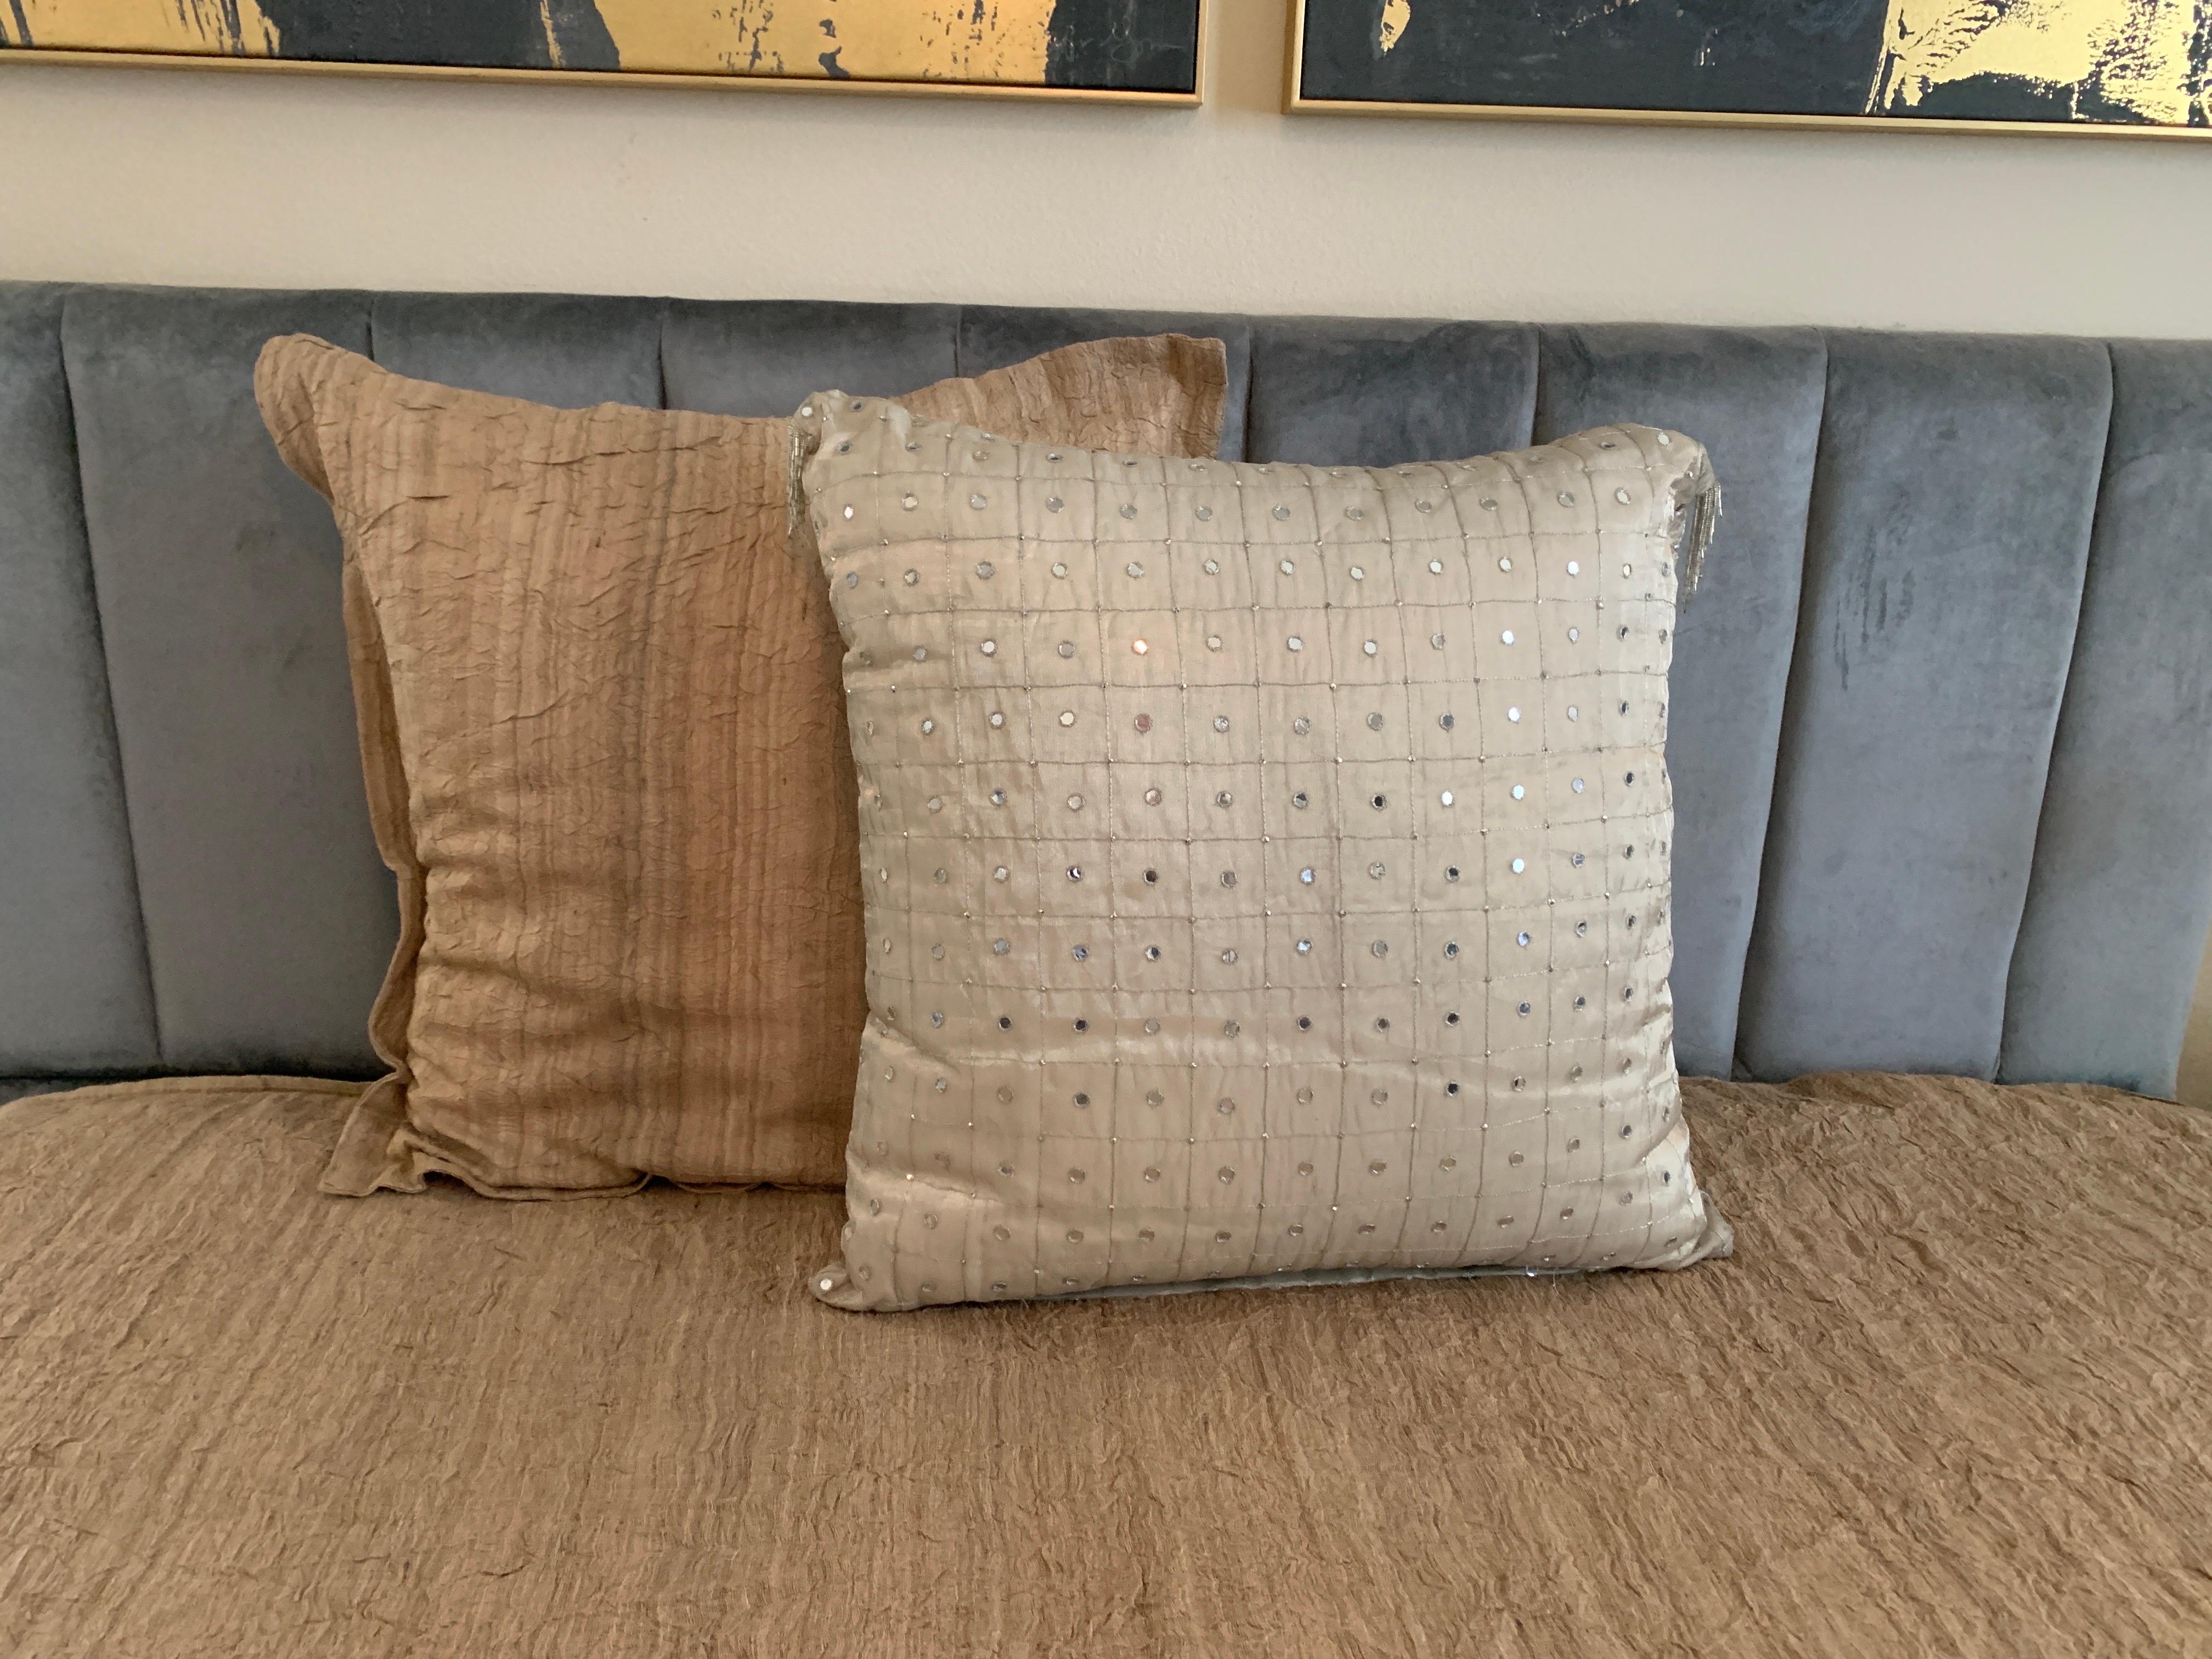 These amazing set of 2 Euro square pillows are part of a luxe bedroom ensemble that cost over $8500. We broke down the ensemble and selling buy individual single pieces, or pairs when appropriate. The set was made by hand, piece by piece by a